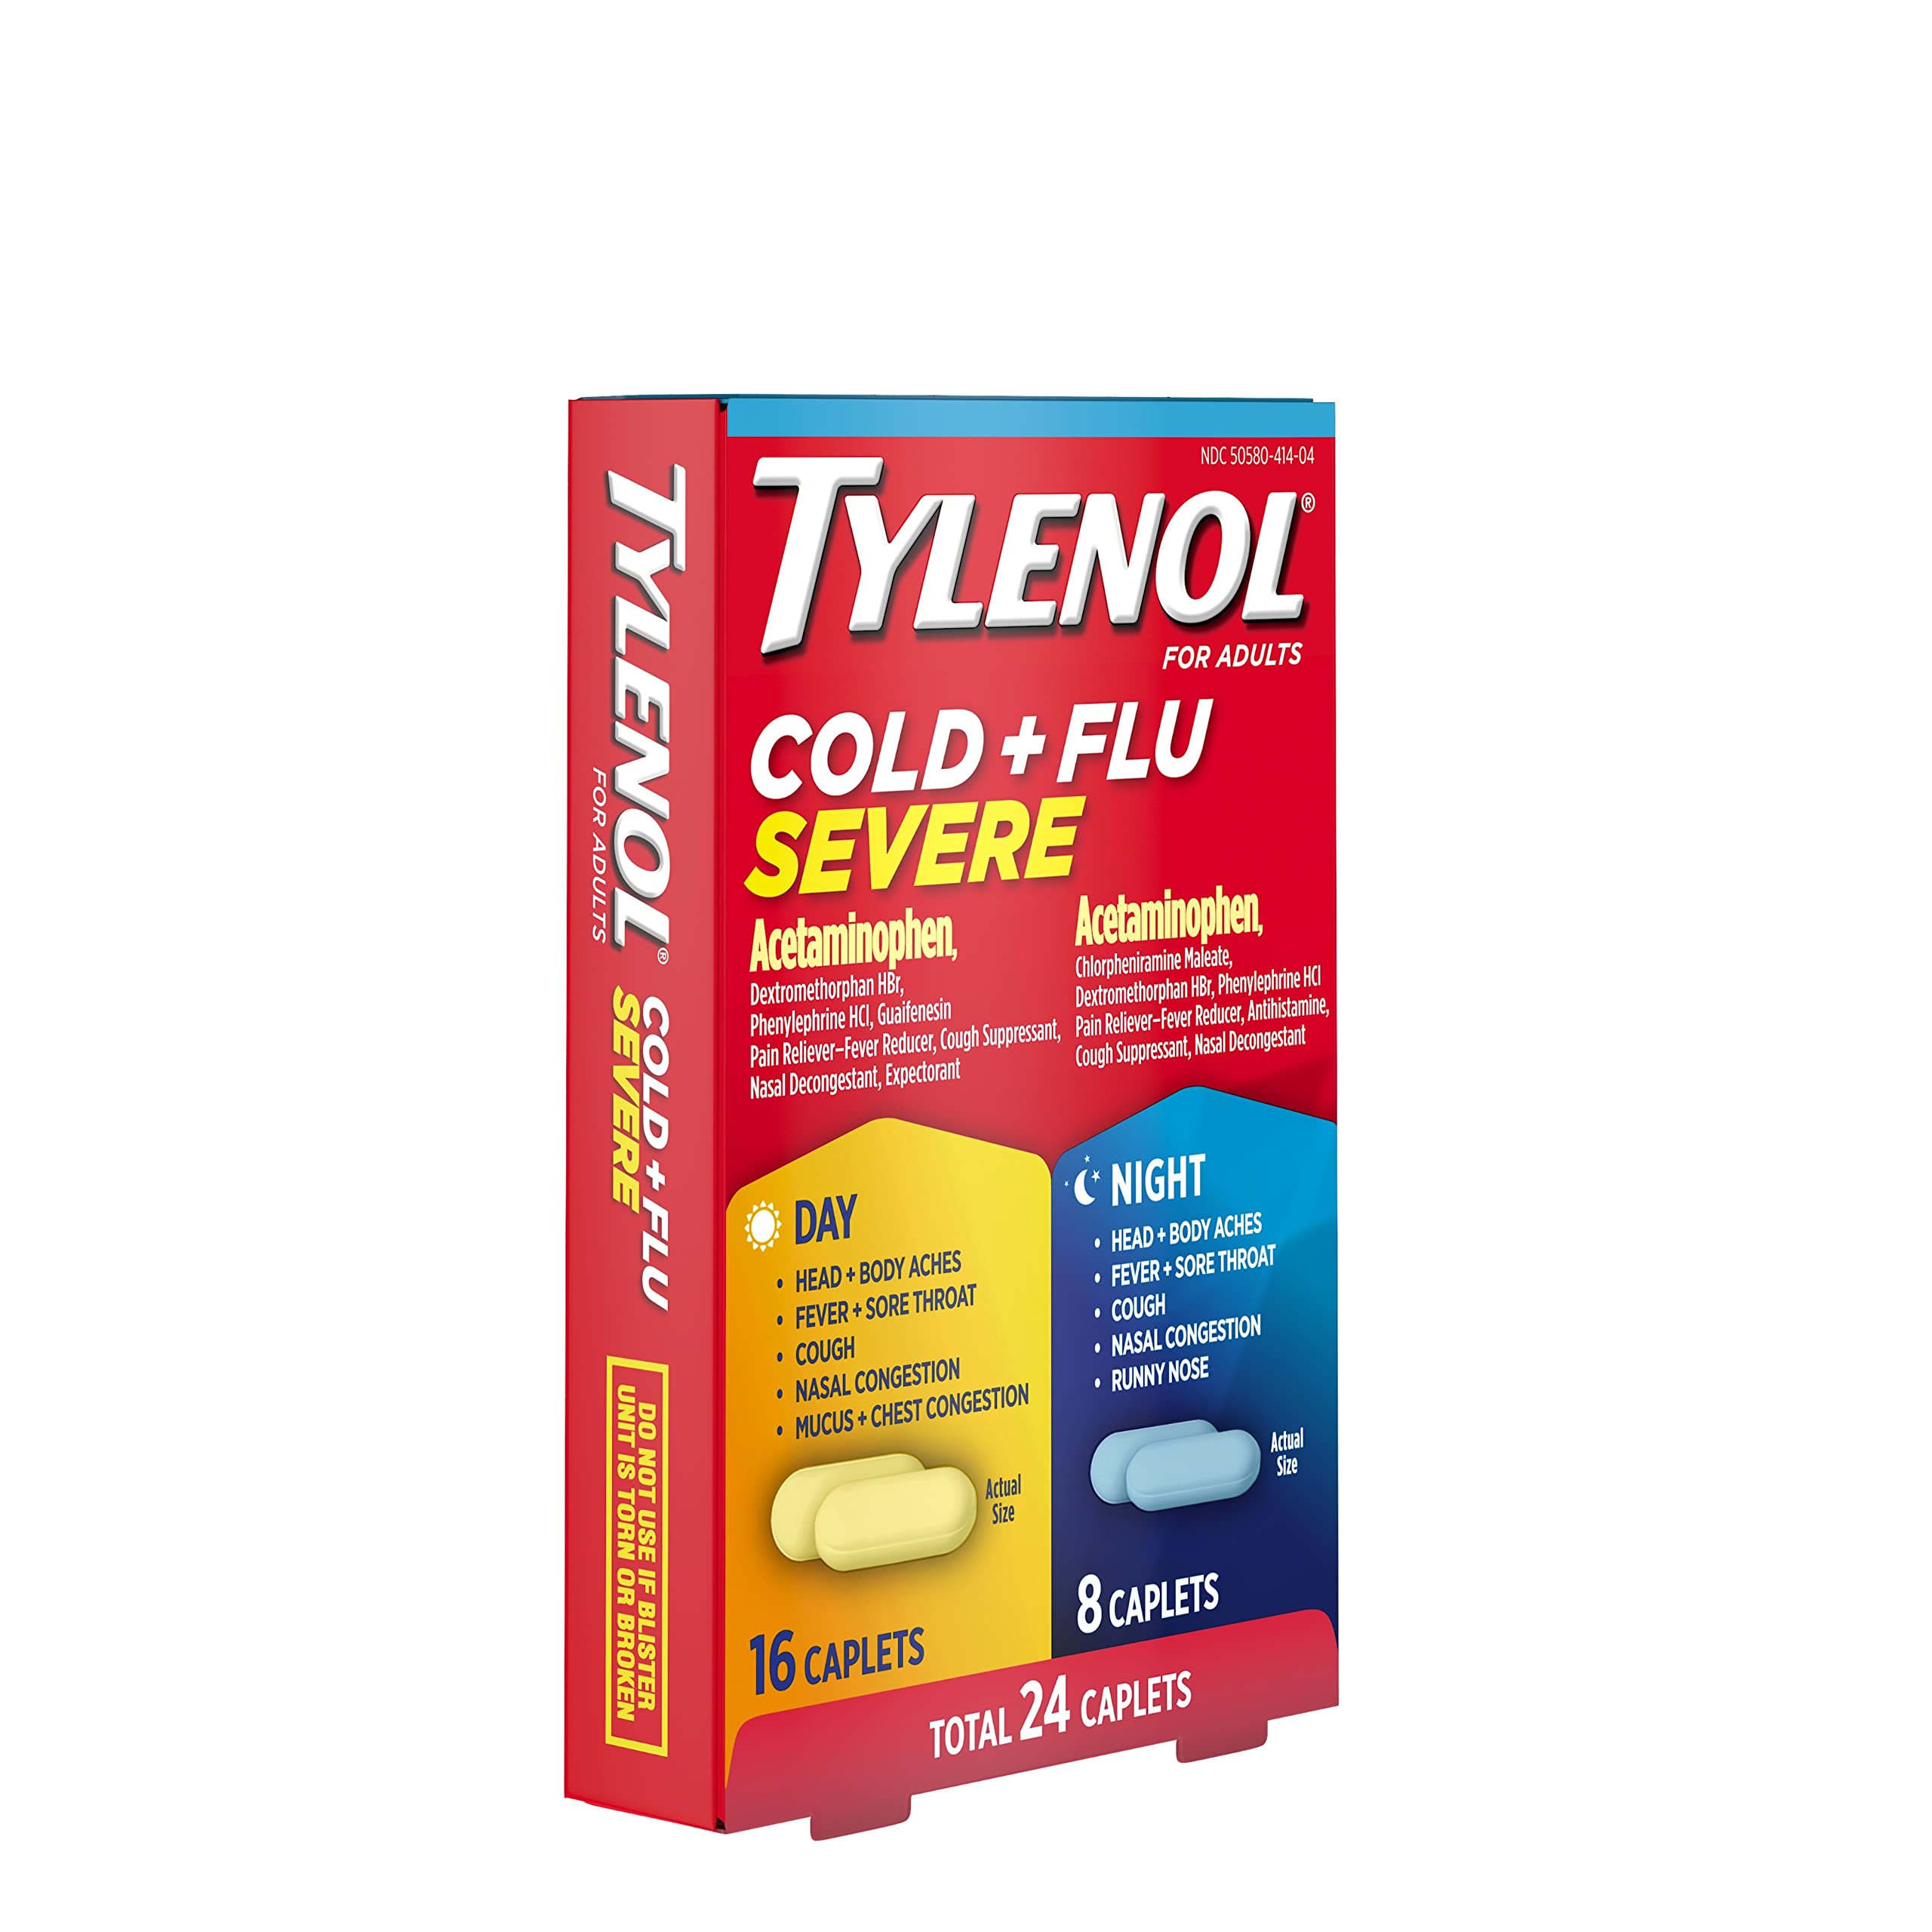 Tylenol Cold + Flu Severe Day & Night Caplets for Fever, Pain, Cough & Congestion Relief, 24 Count